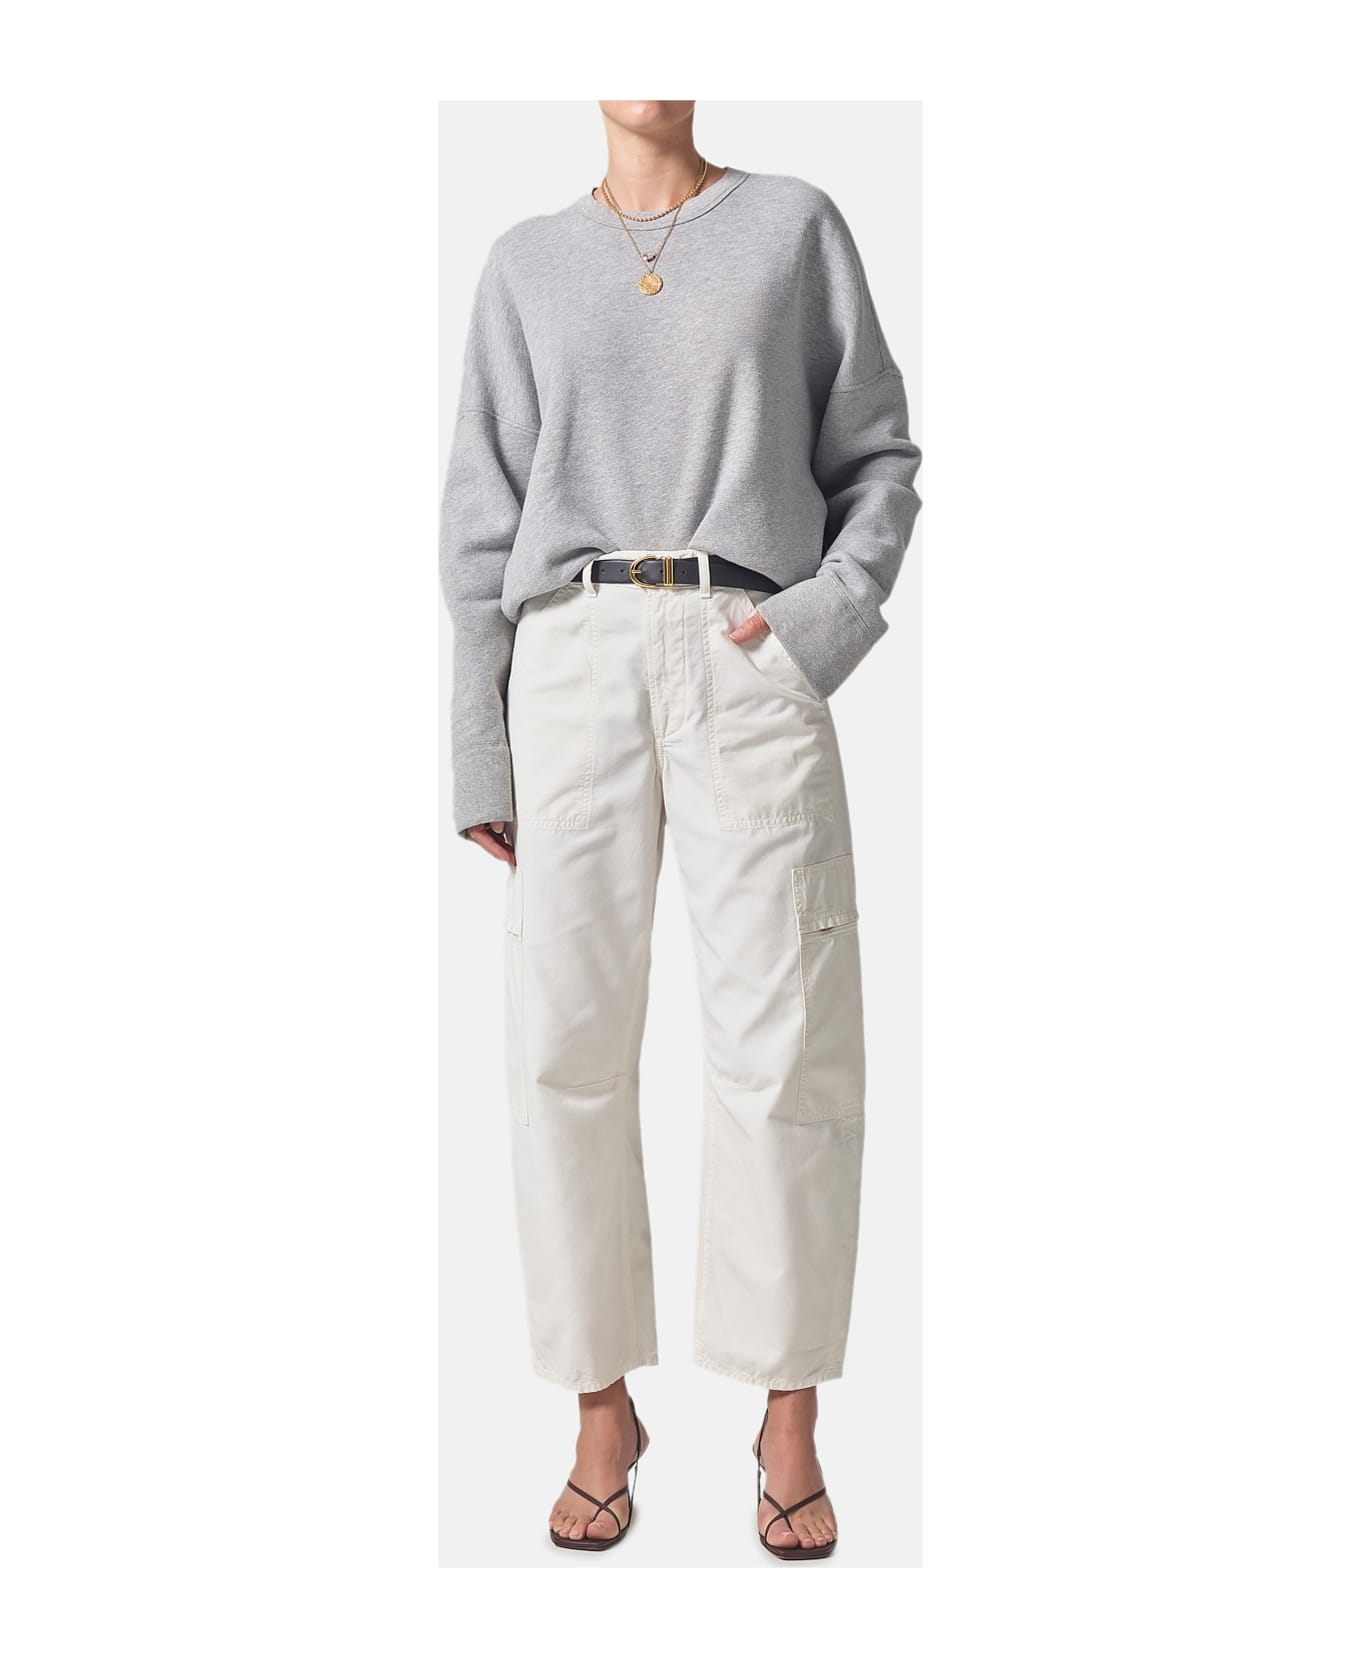 Citizens of Humanity Marcelle Cargo Pants - White